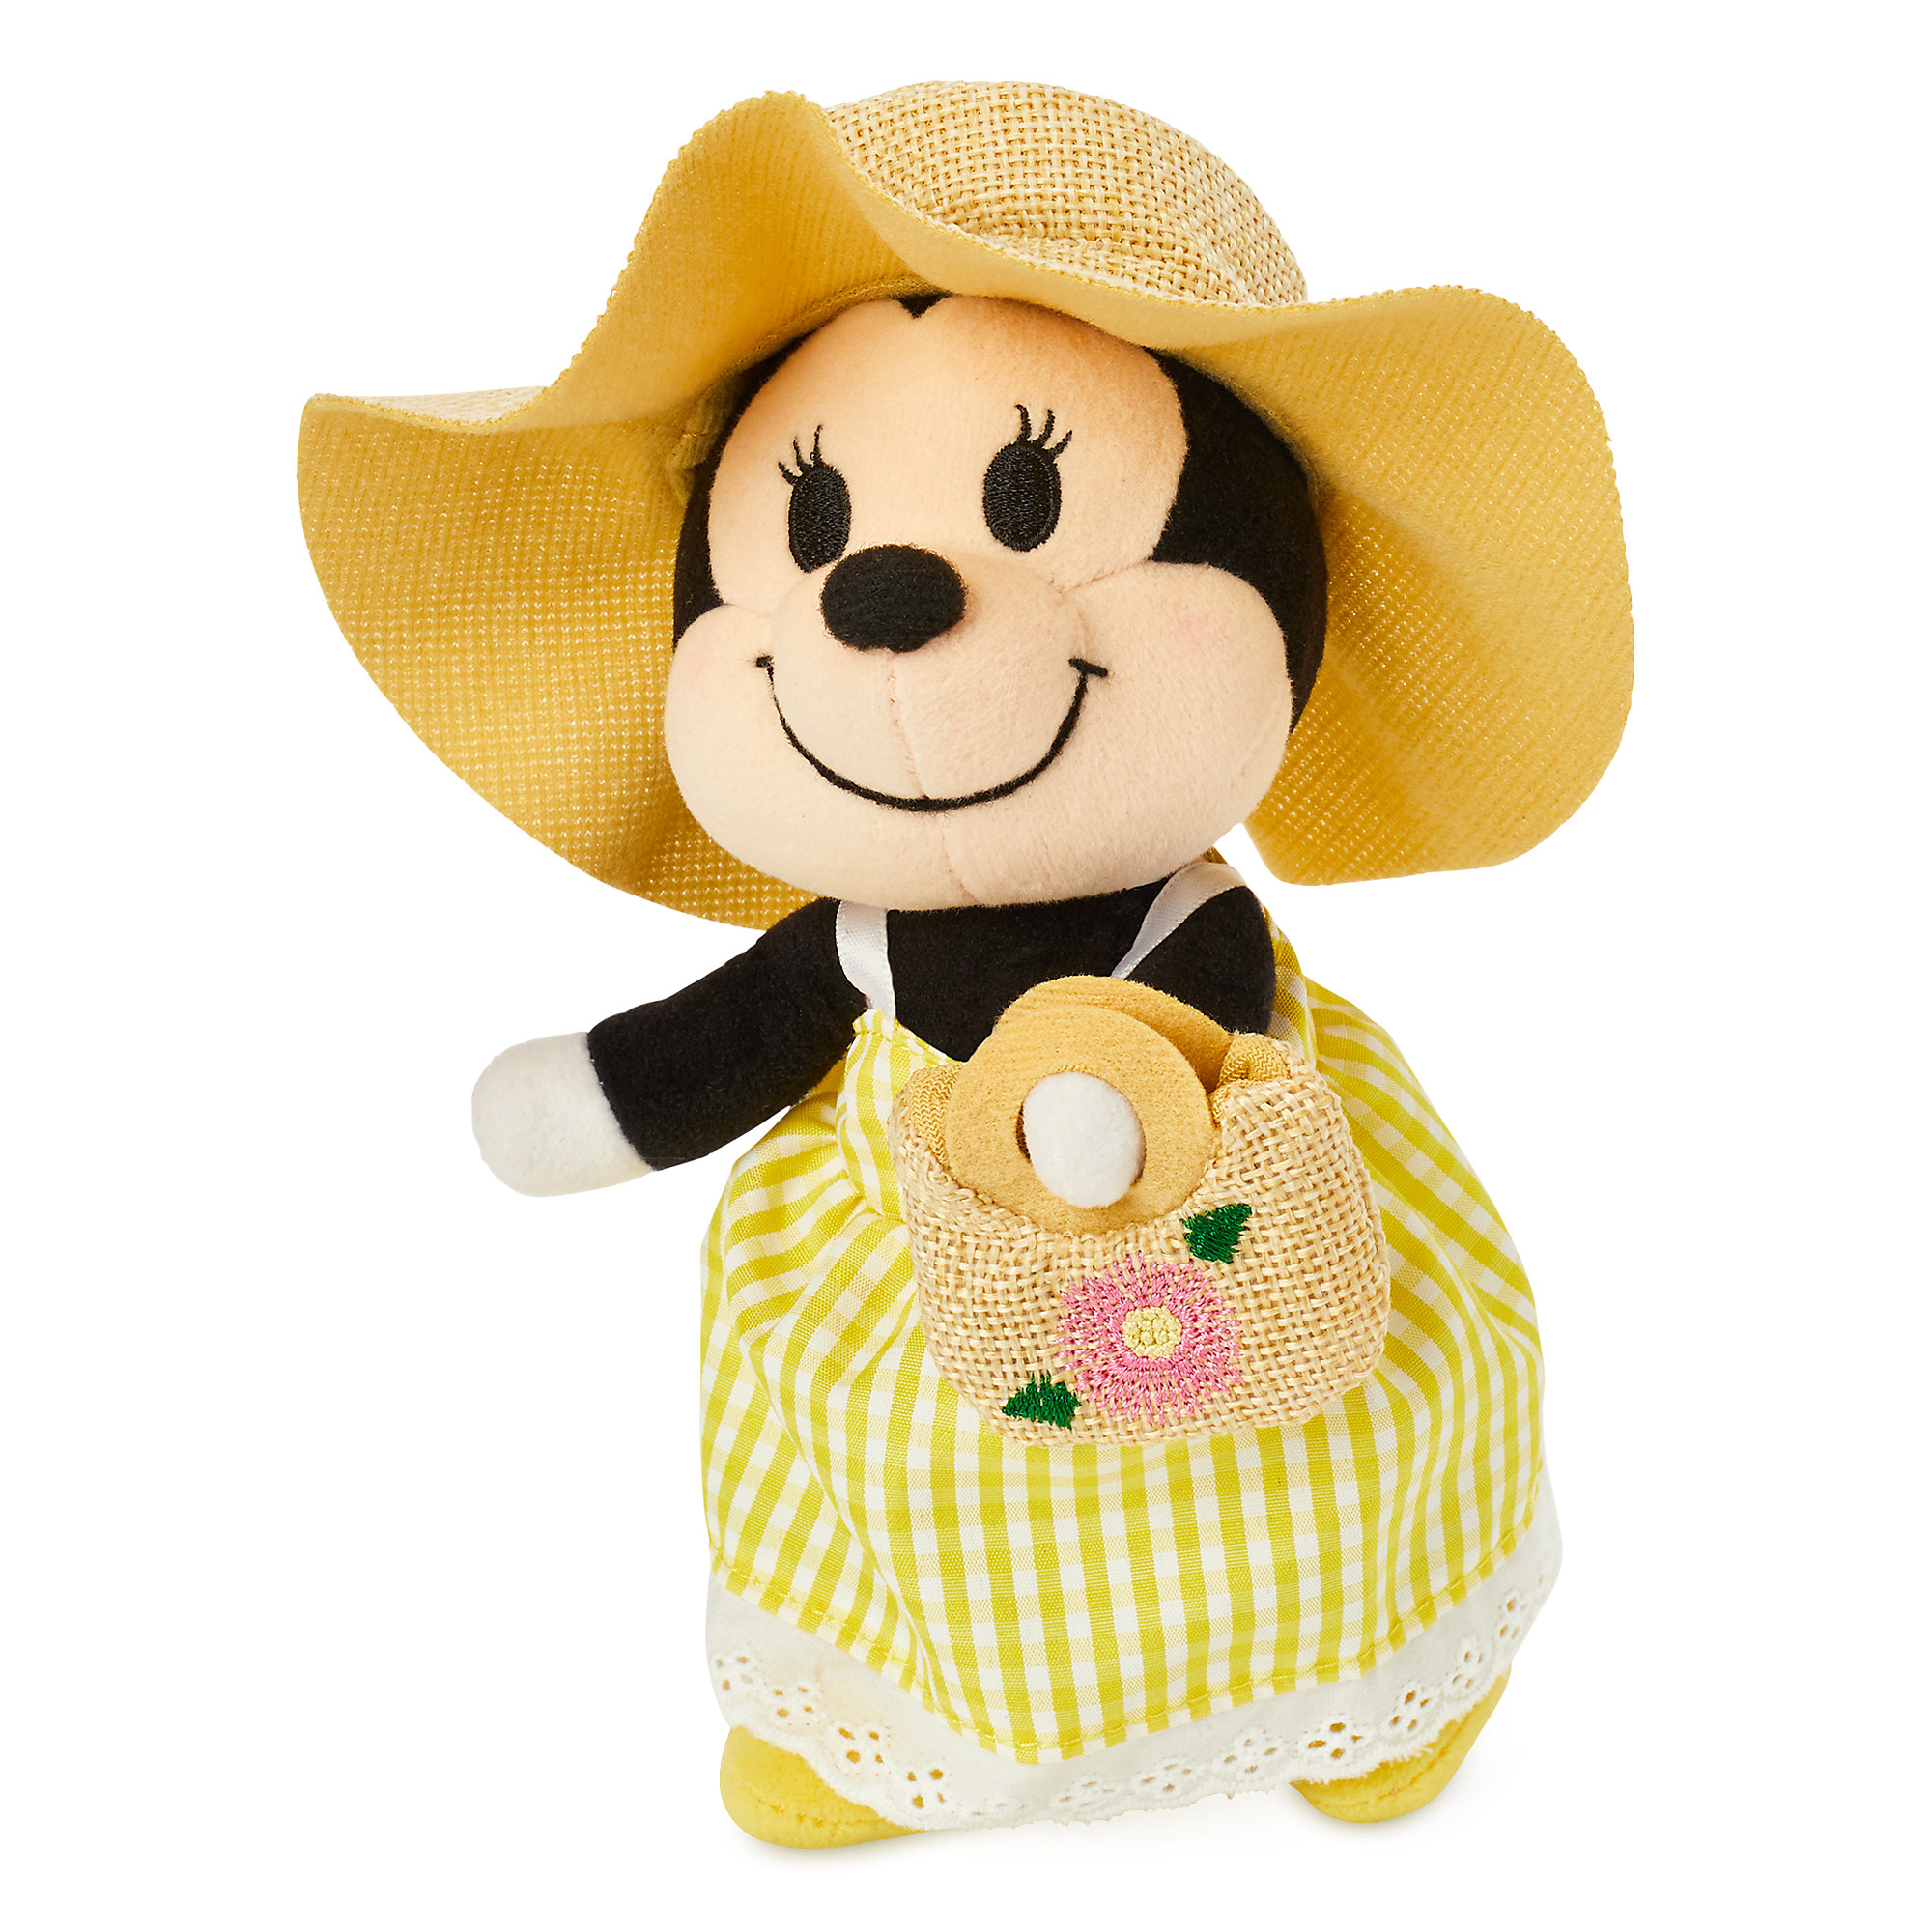 The Disney nuiMOs May Collection Is Ready For Summer